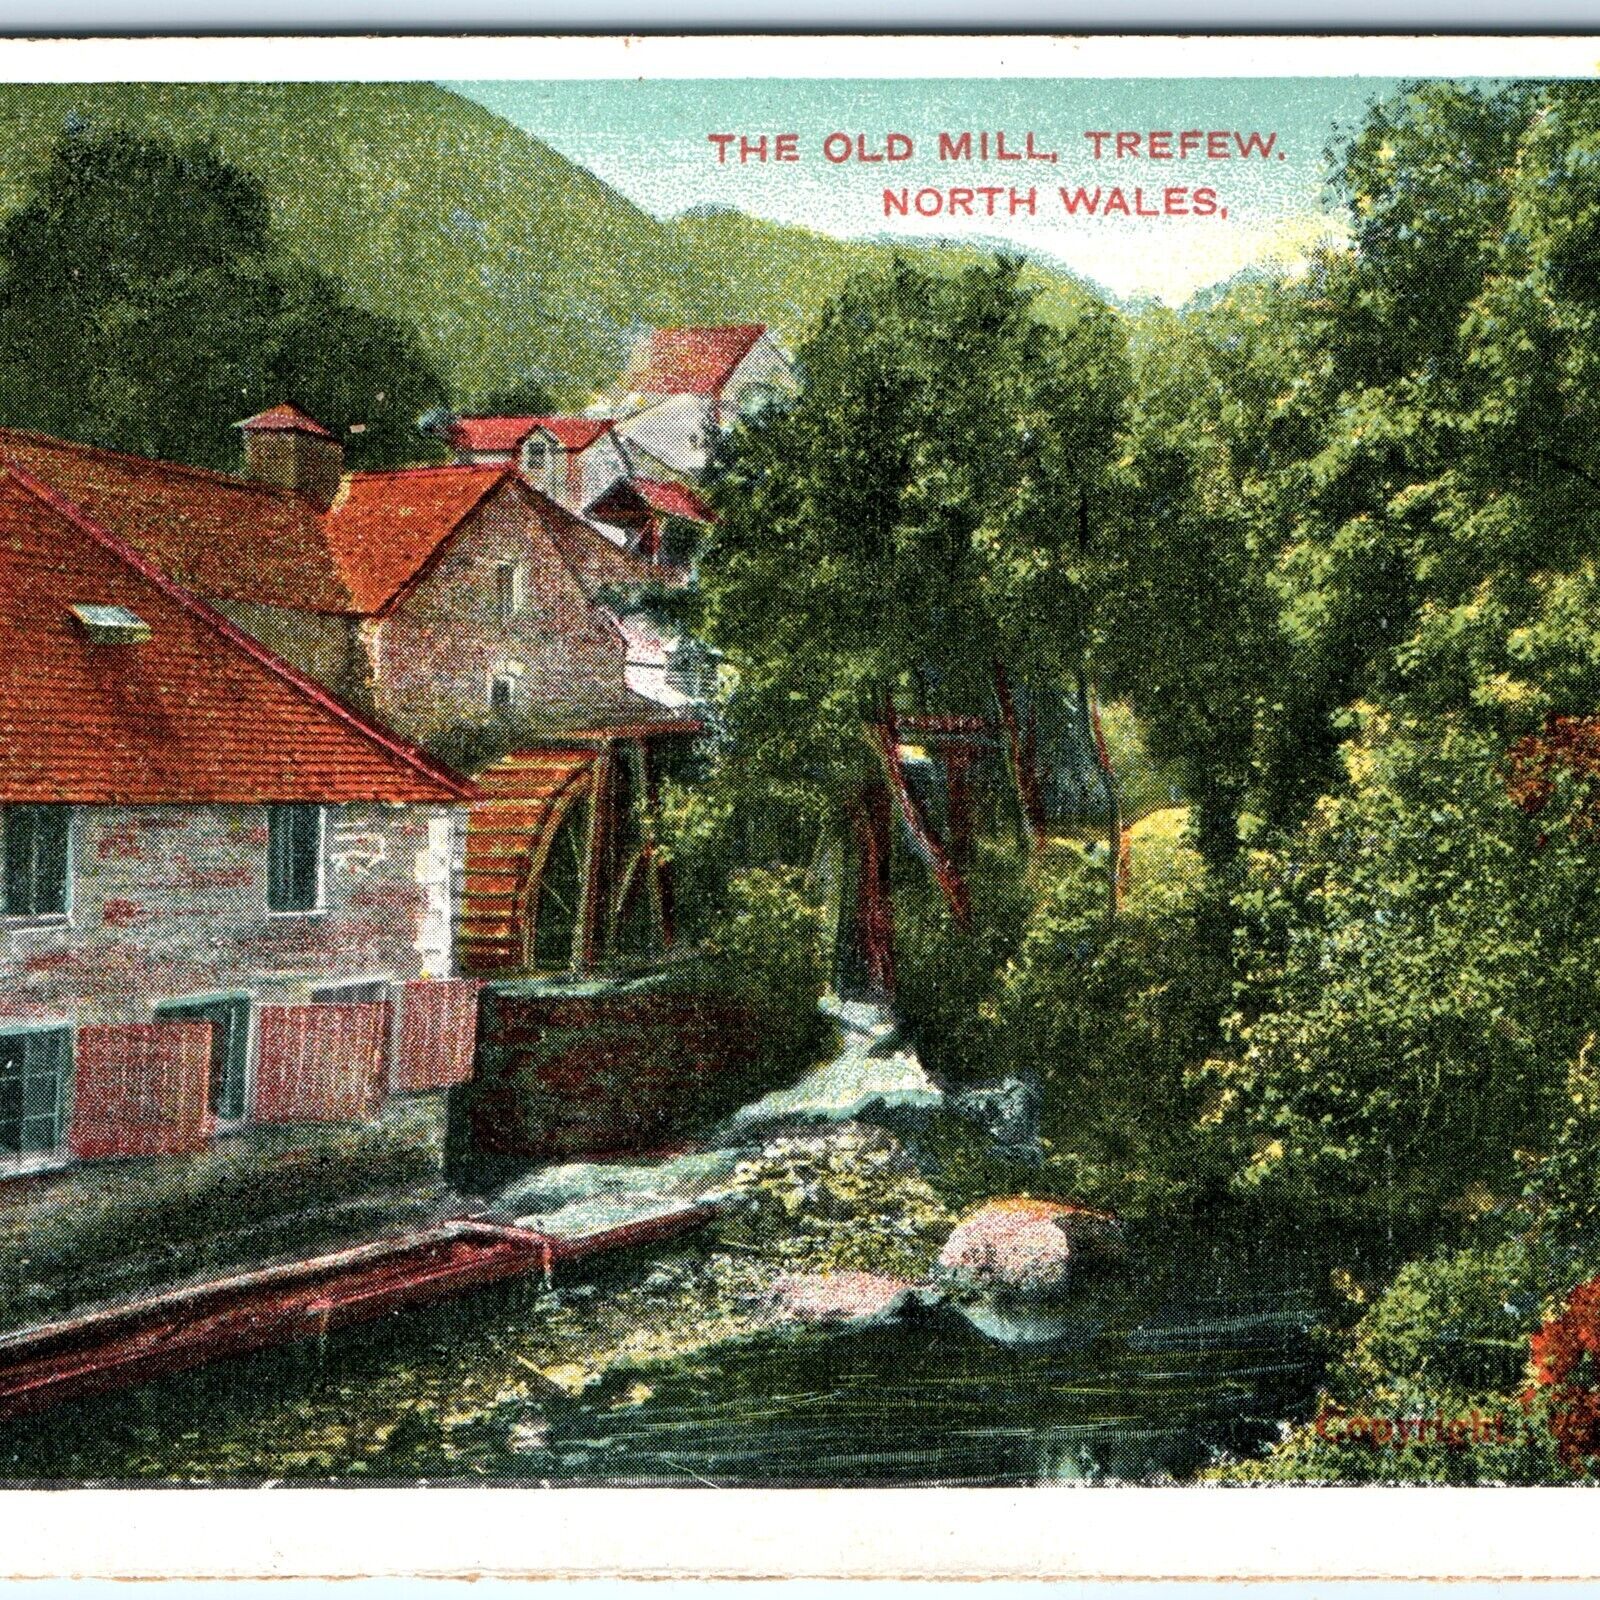 c1910s Trefriw, North Wales, England Old Mill Water Wheel Colorful Star PC A153